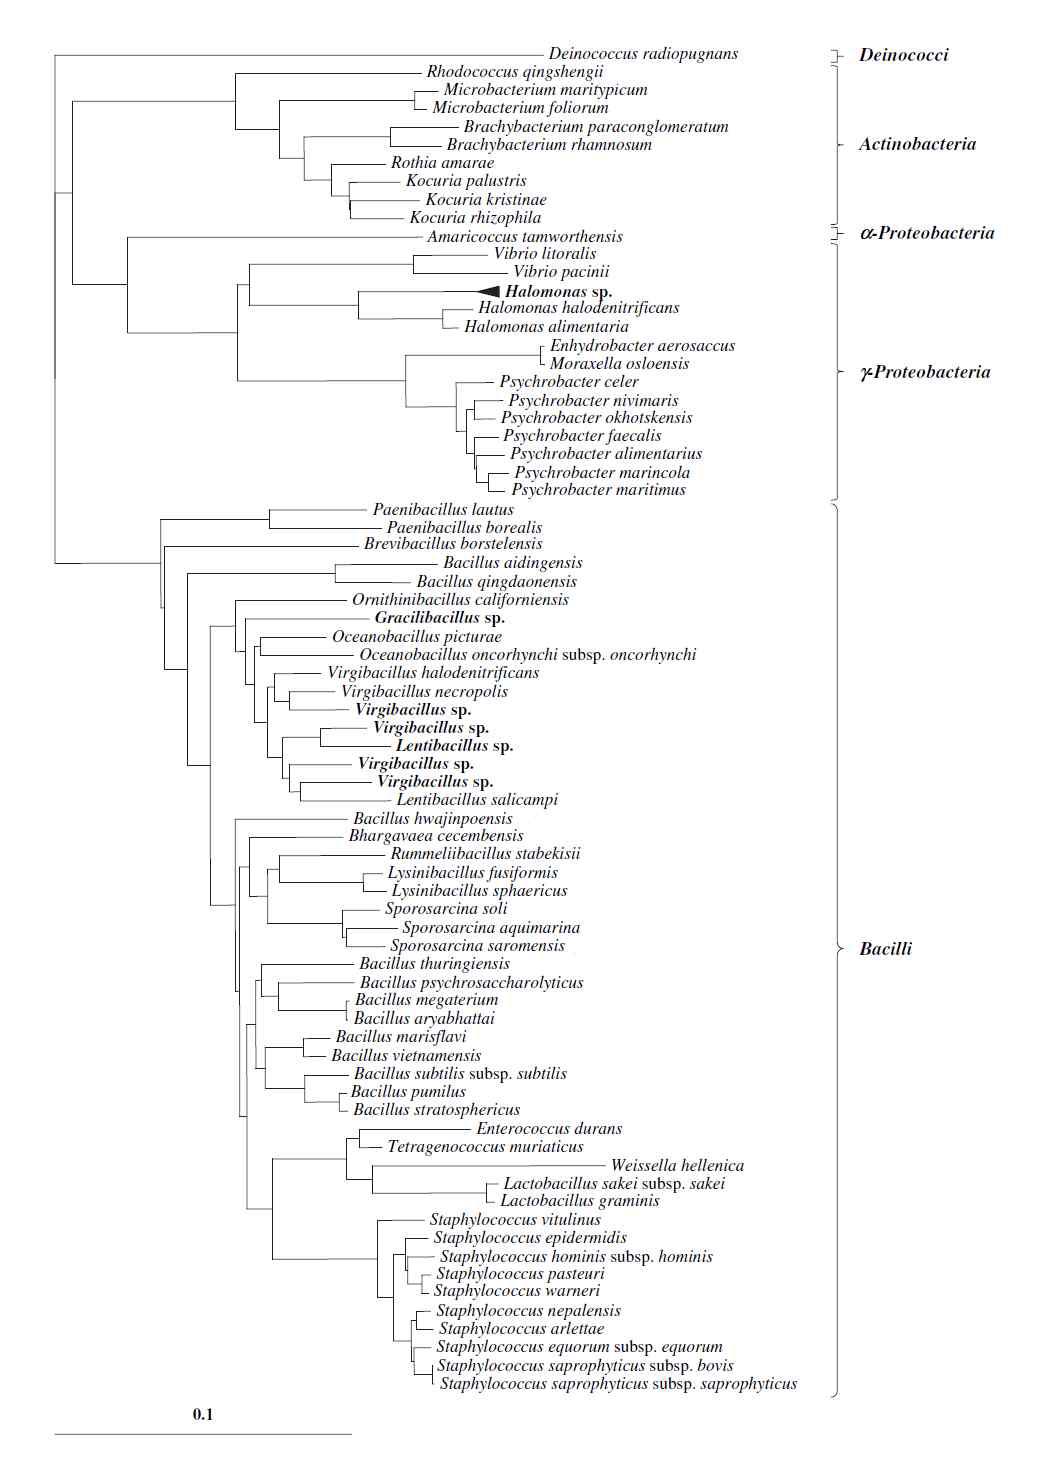 Phylogenetic tree of the isolates from Myeolchi-jeotgal, showing the relationship based on the determination of the near-complete 16S rDNA sequences (1407 nt) of the isolates